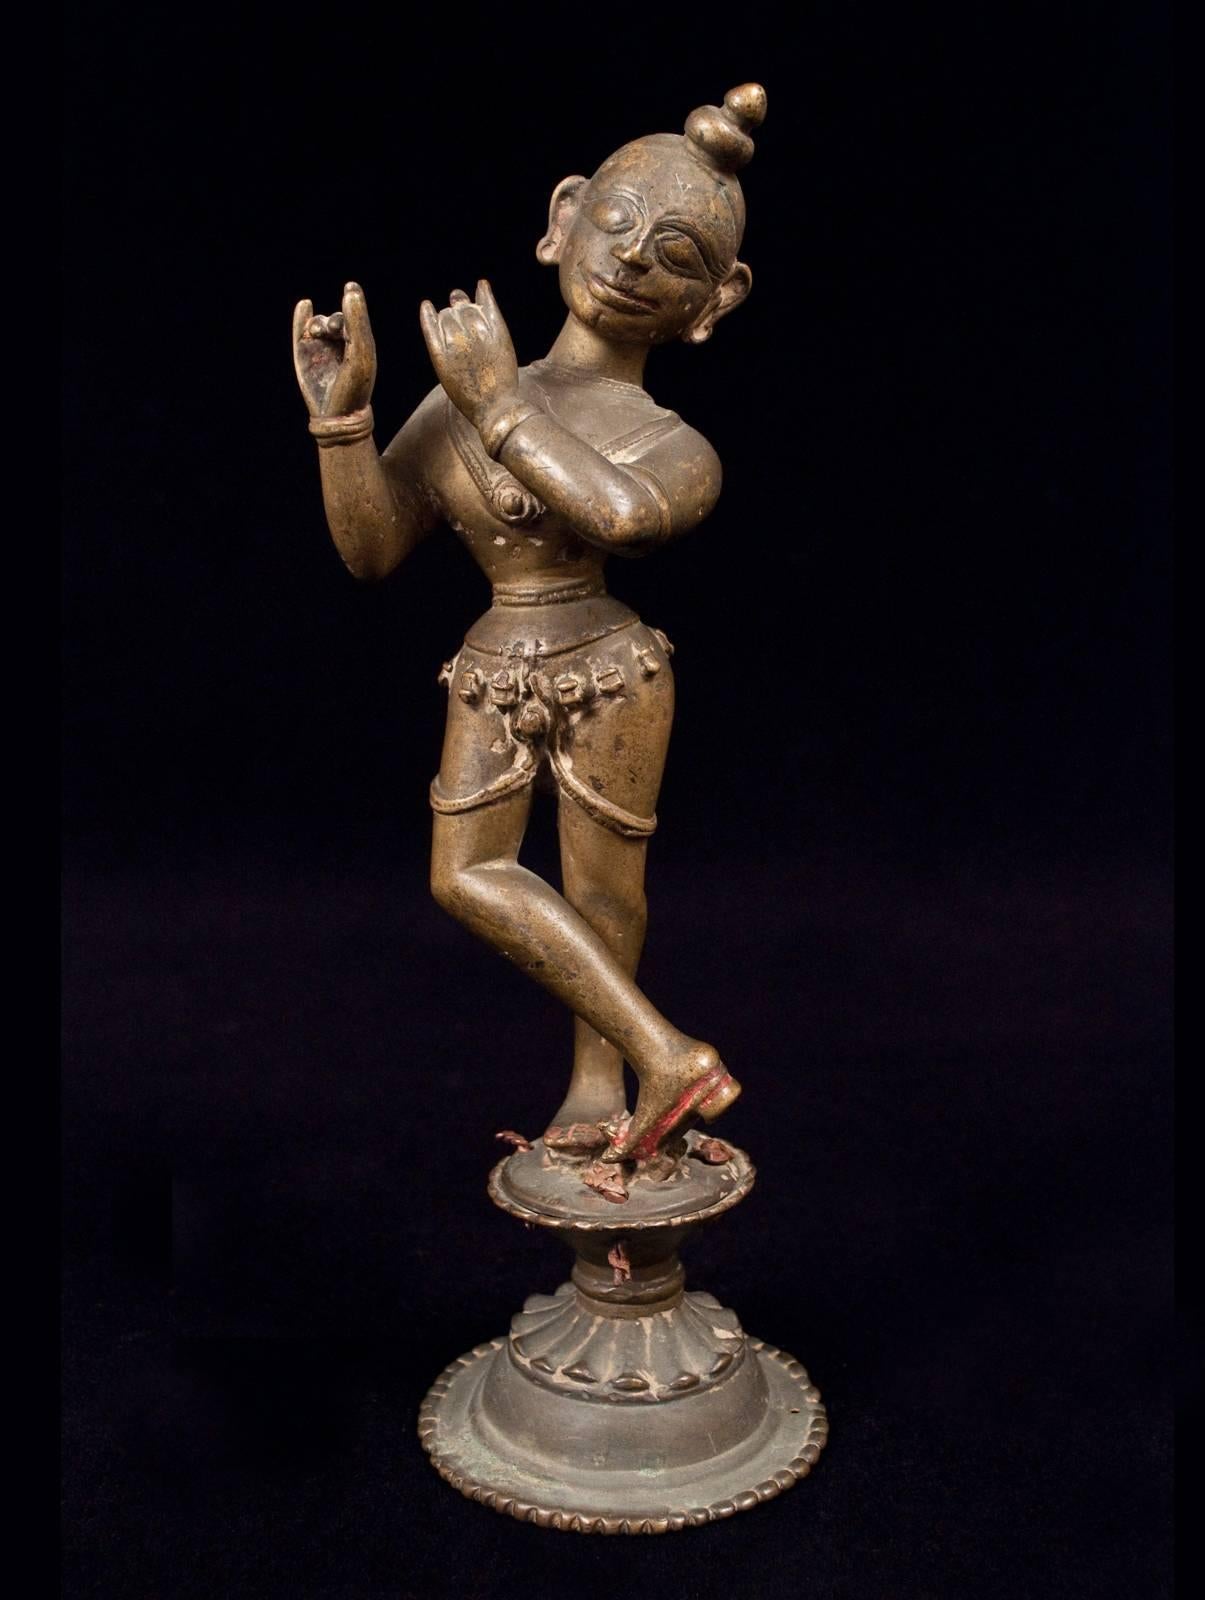 16th Century Krishna (Venugopala) Bronze Figure Playing the Flute from Orissa, India

The Venugopala form of Krishna playing the flute is to Vaishnavite iconography what Nataraja is to the Shaivites: The piece de resistance. Here he stands in his